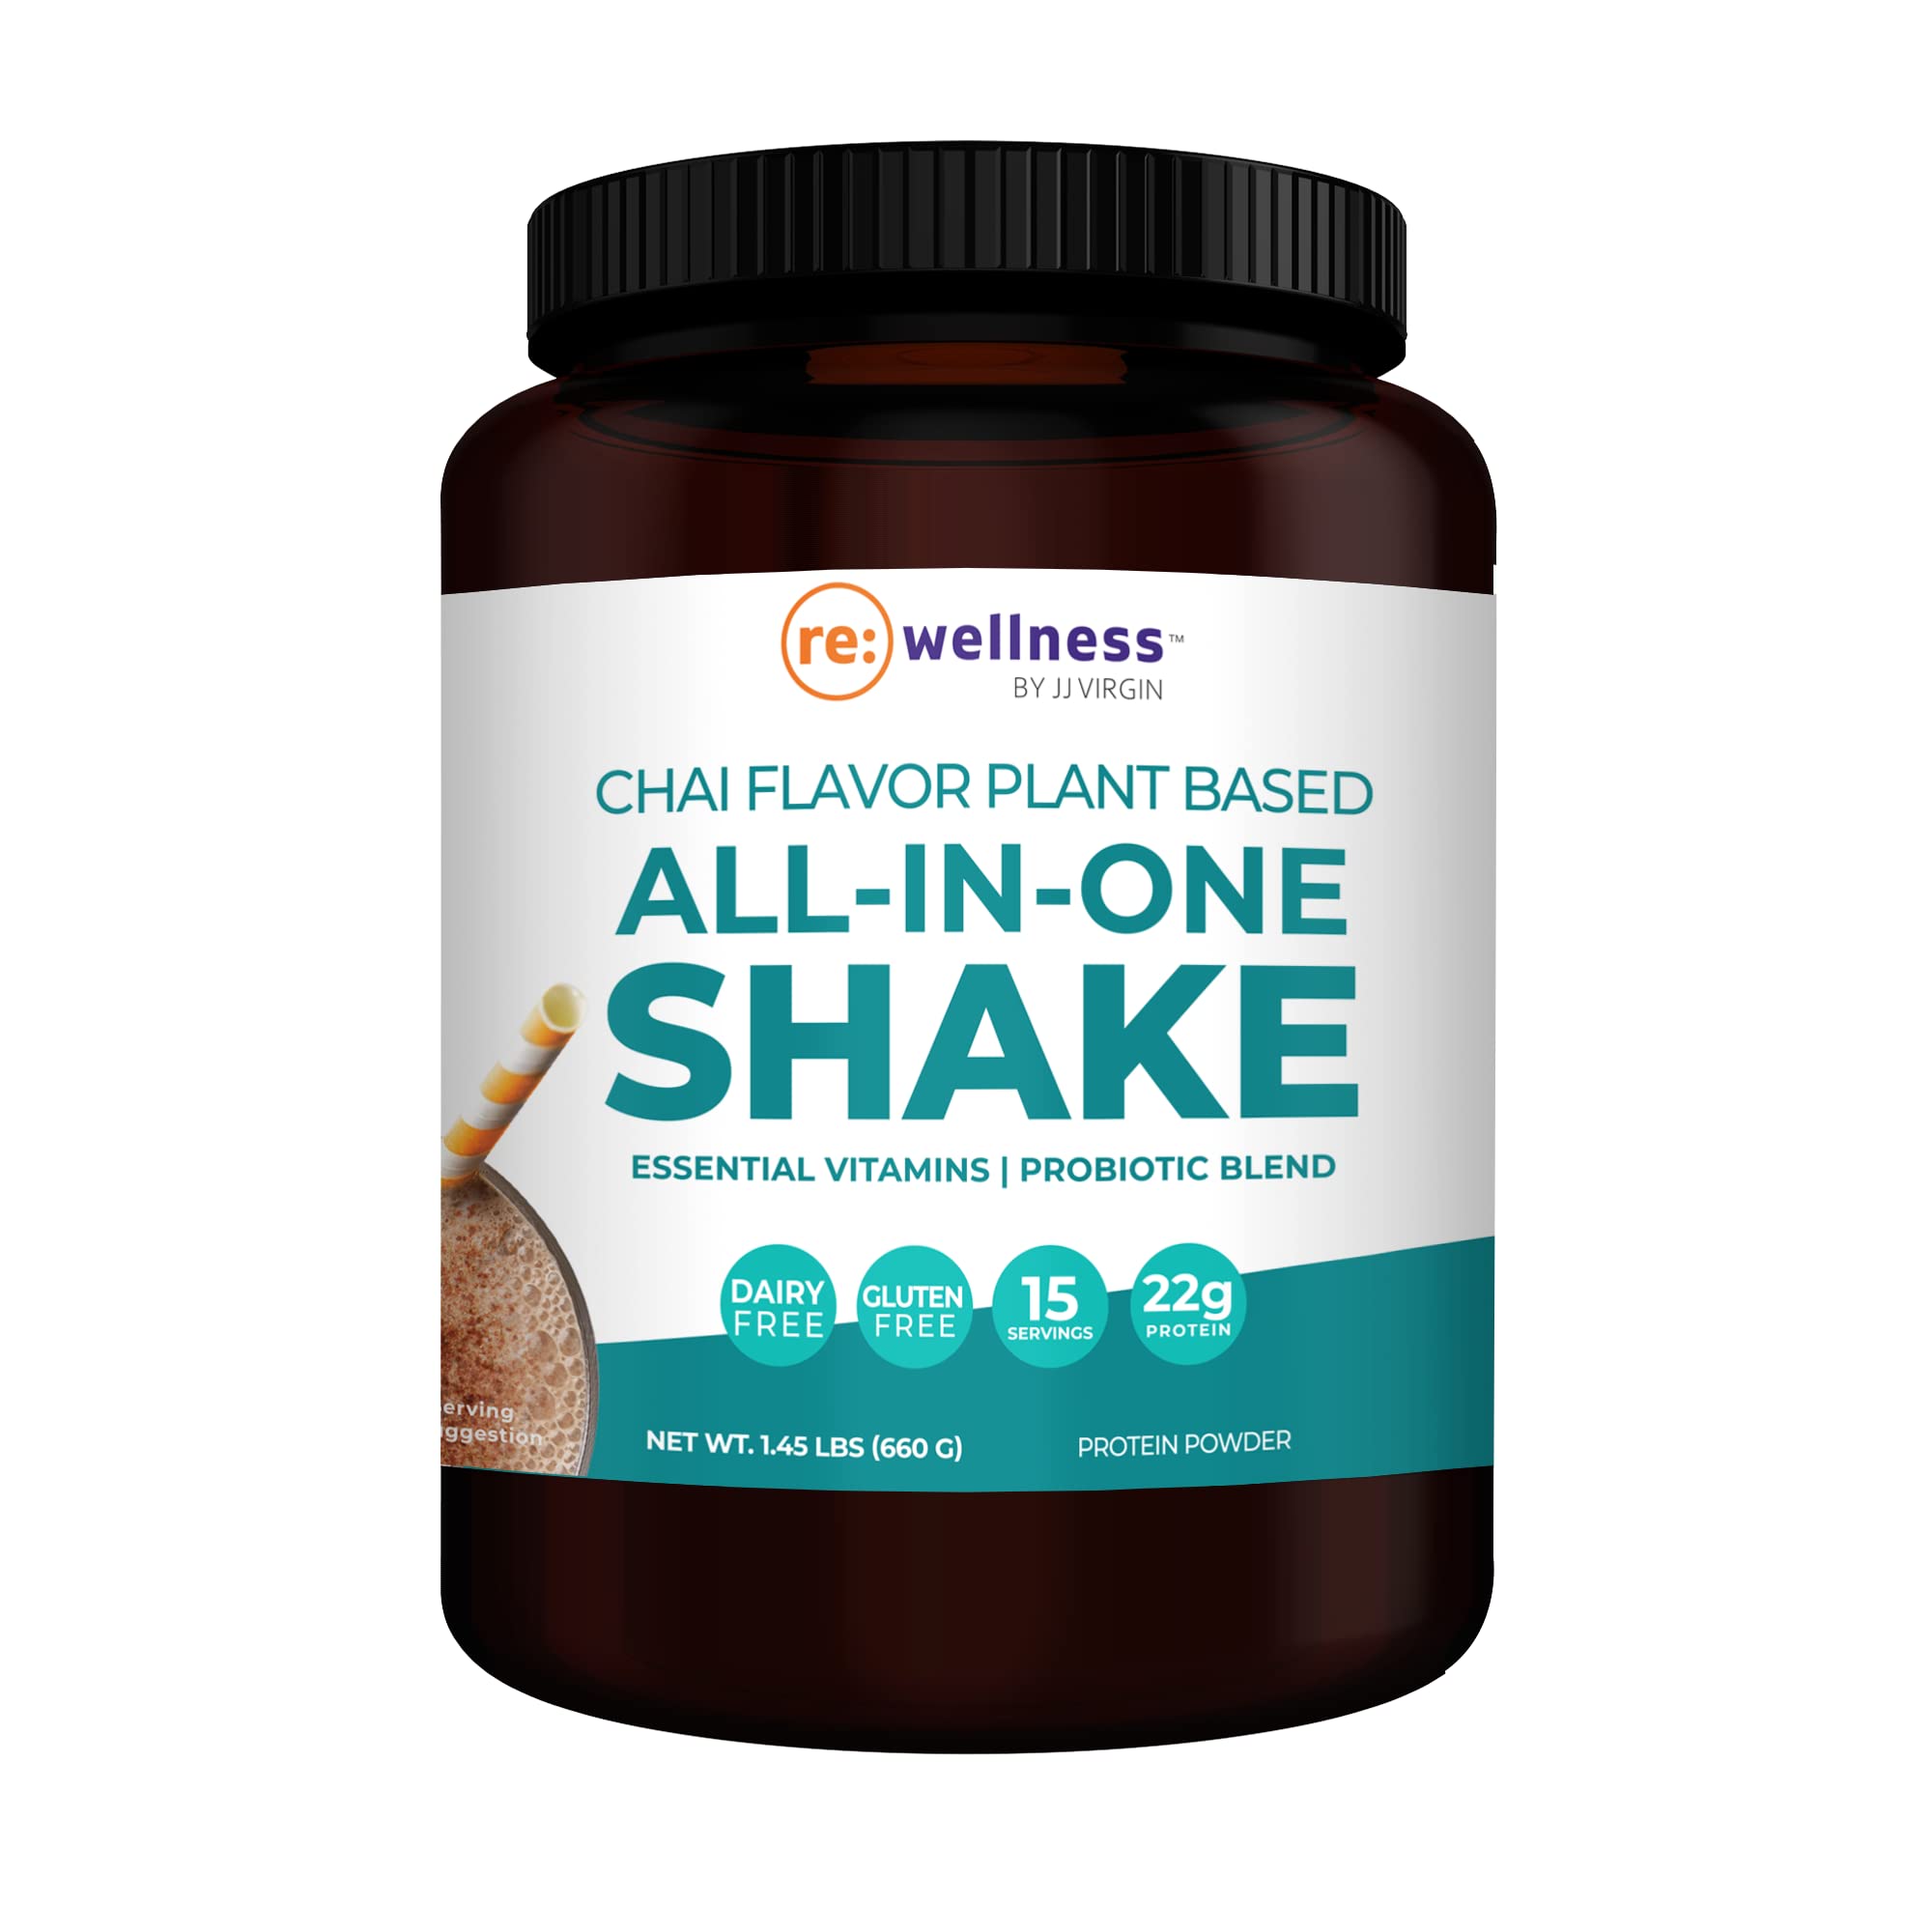 Reignite Wellness by JJ Virgin Chai Plant Based All in 1 Shake - Chia, Chlorella, + Pea Protein Powder - Contains Essential Vitamins & Probiotic Blend to Support Immunity + Gut Health (15 Servings)